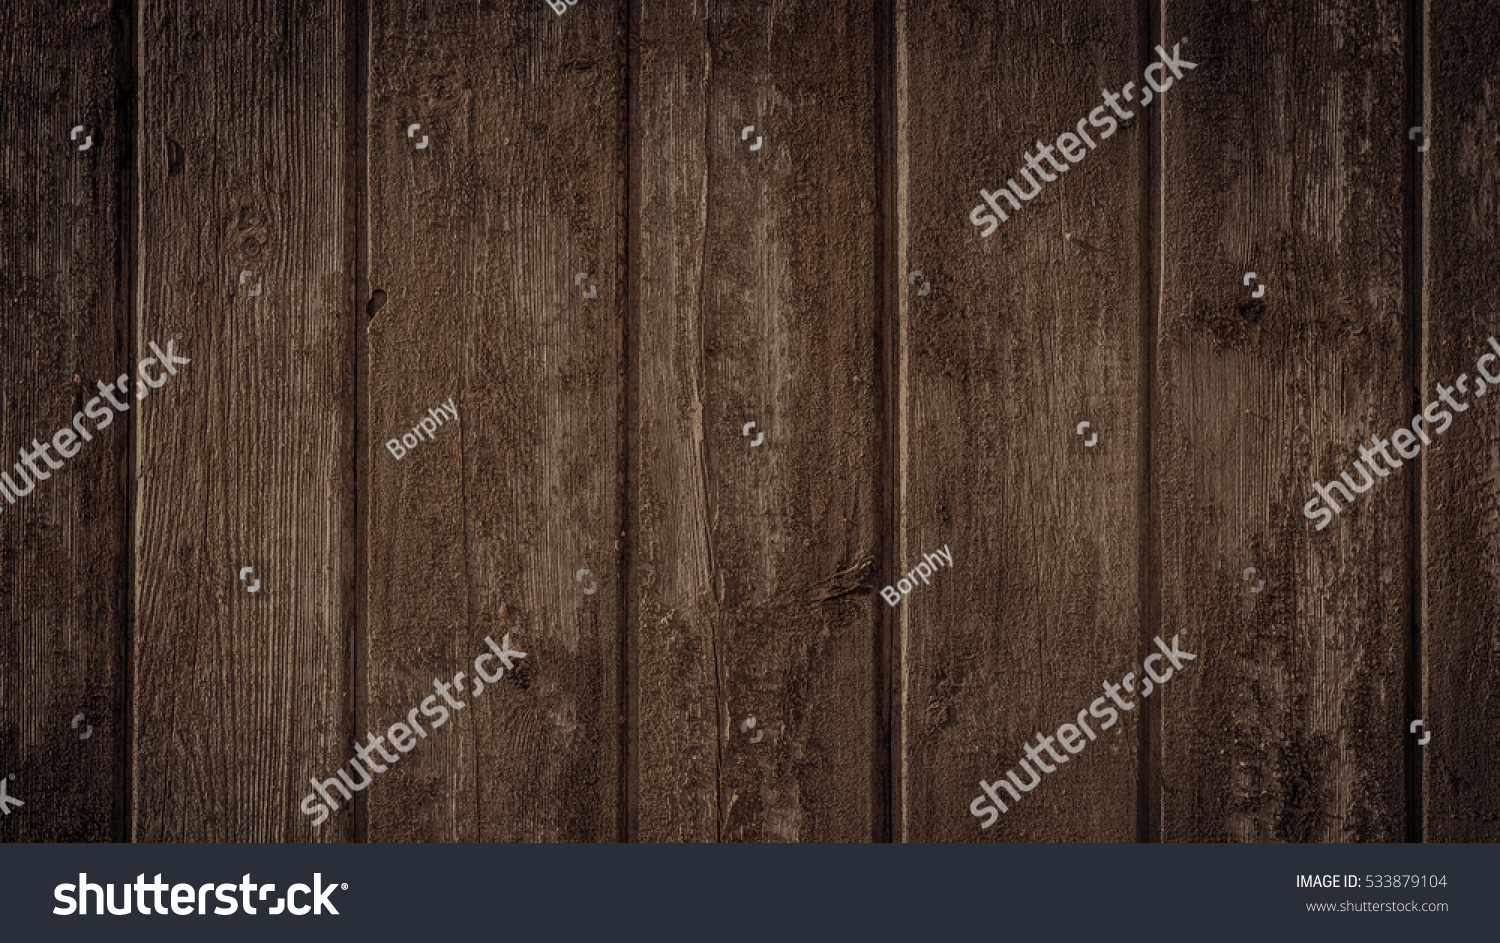 Old rural wooden wall in dark brown colors, detailed plank photo texture. Natural wooden building structure background. #533879104